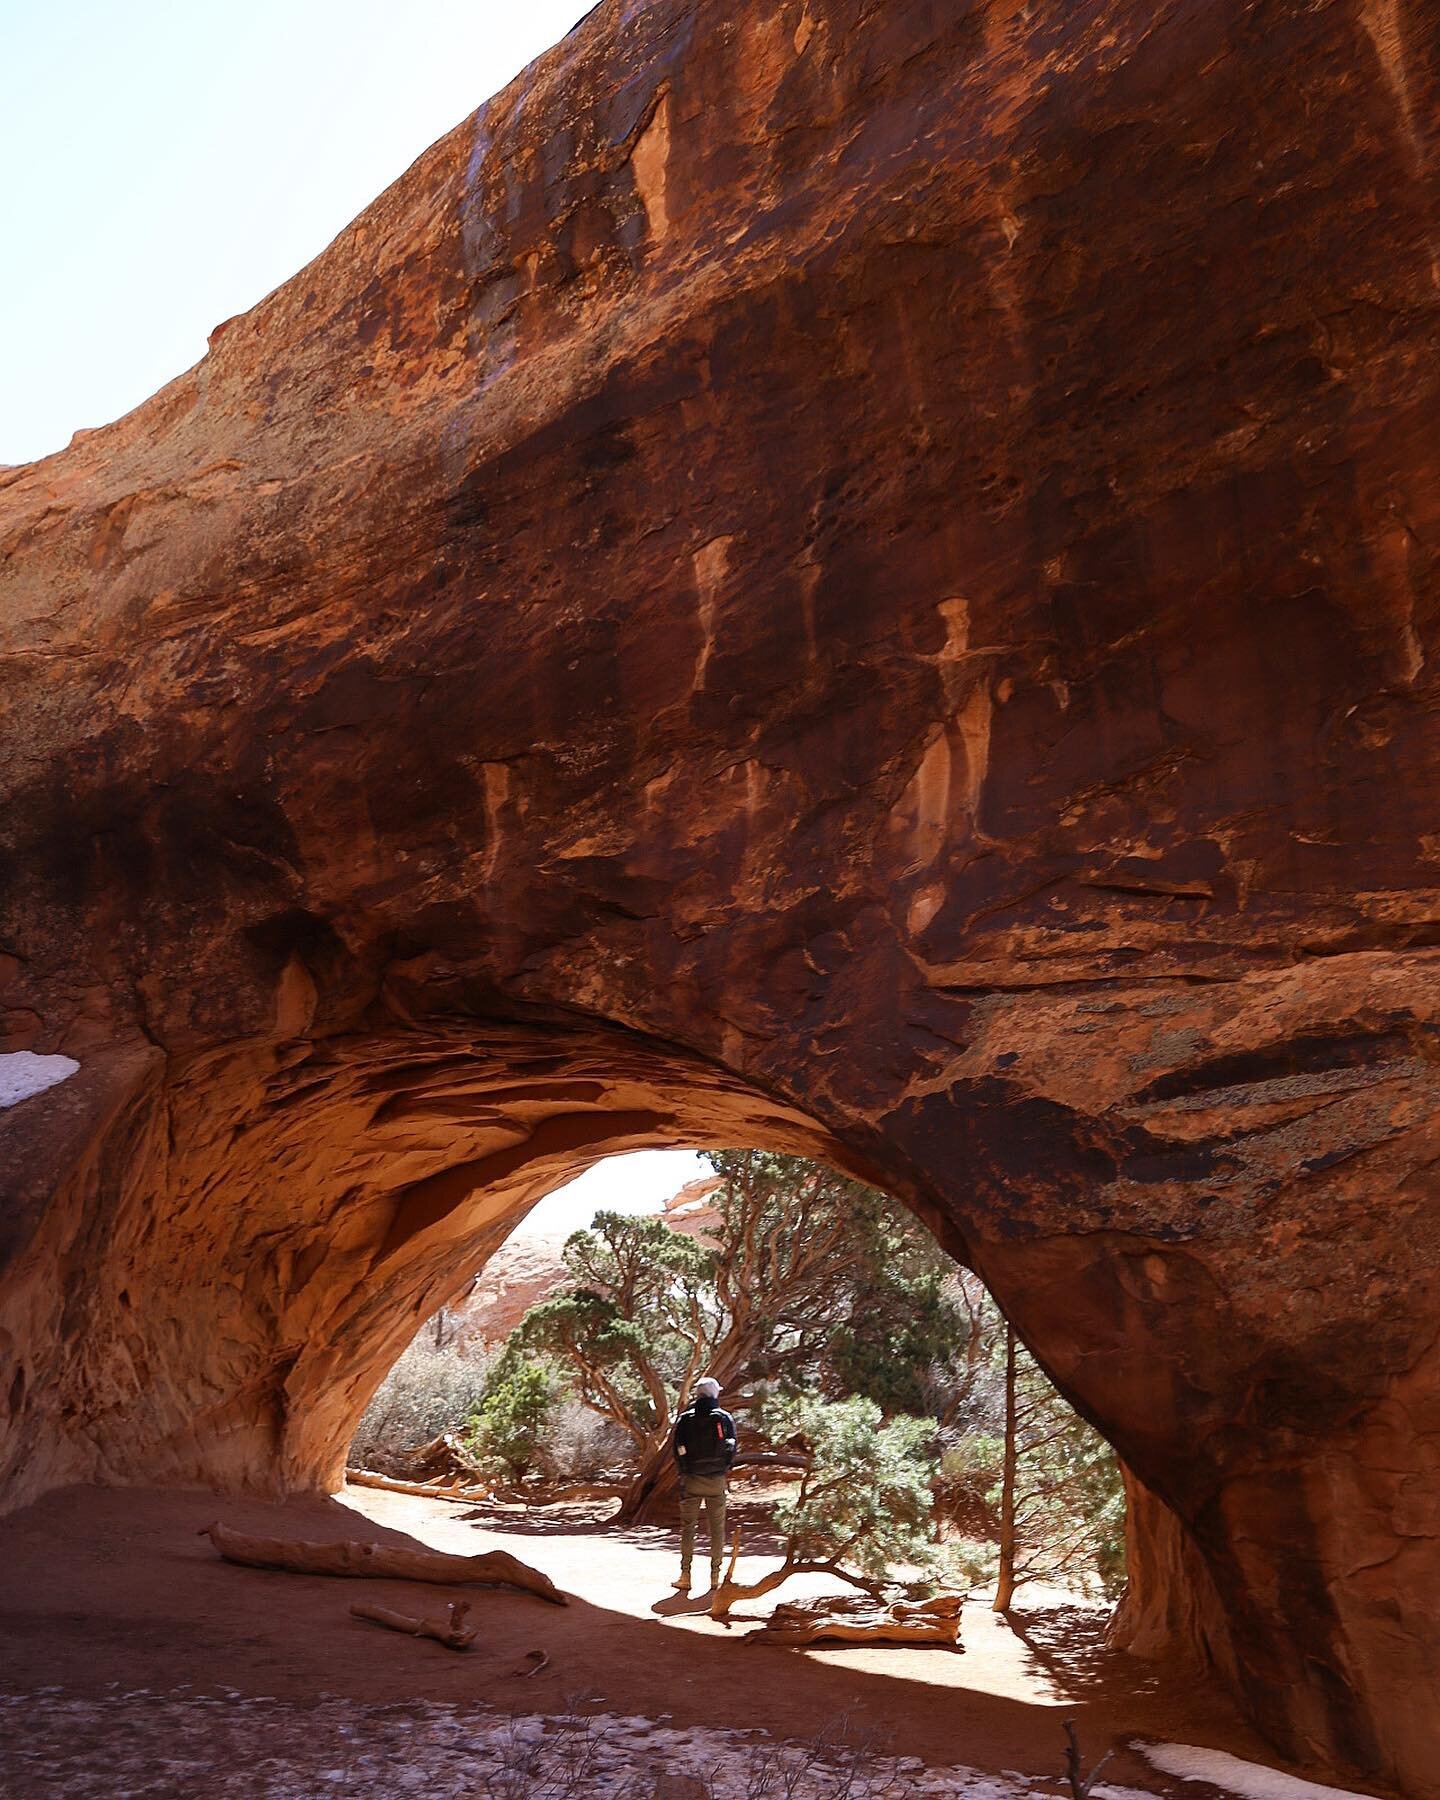 One week into our March Hiking Challenge&mdash;where are you hitting the trail this month? We&rsquo;re filling our boots with red dust in Moab to kick it off. 🥾 
#offandoutchallenge